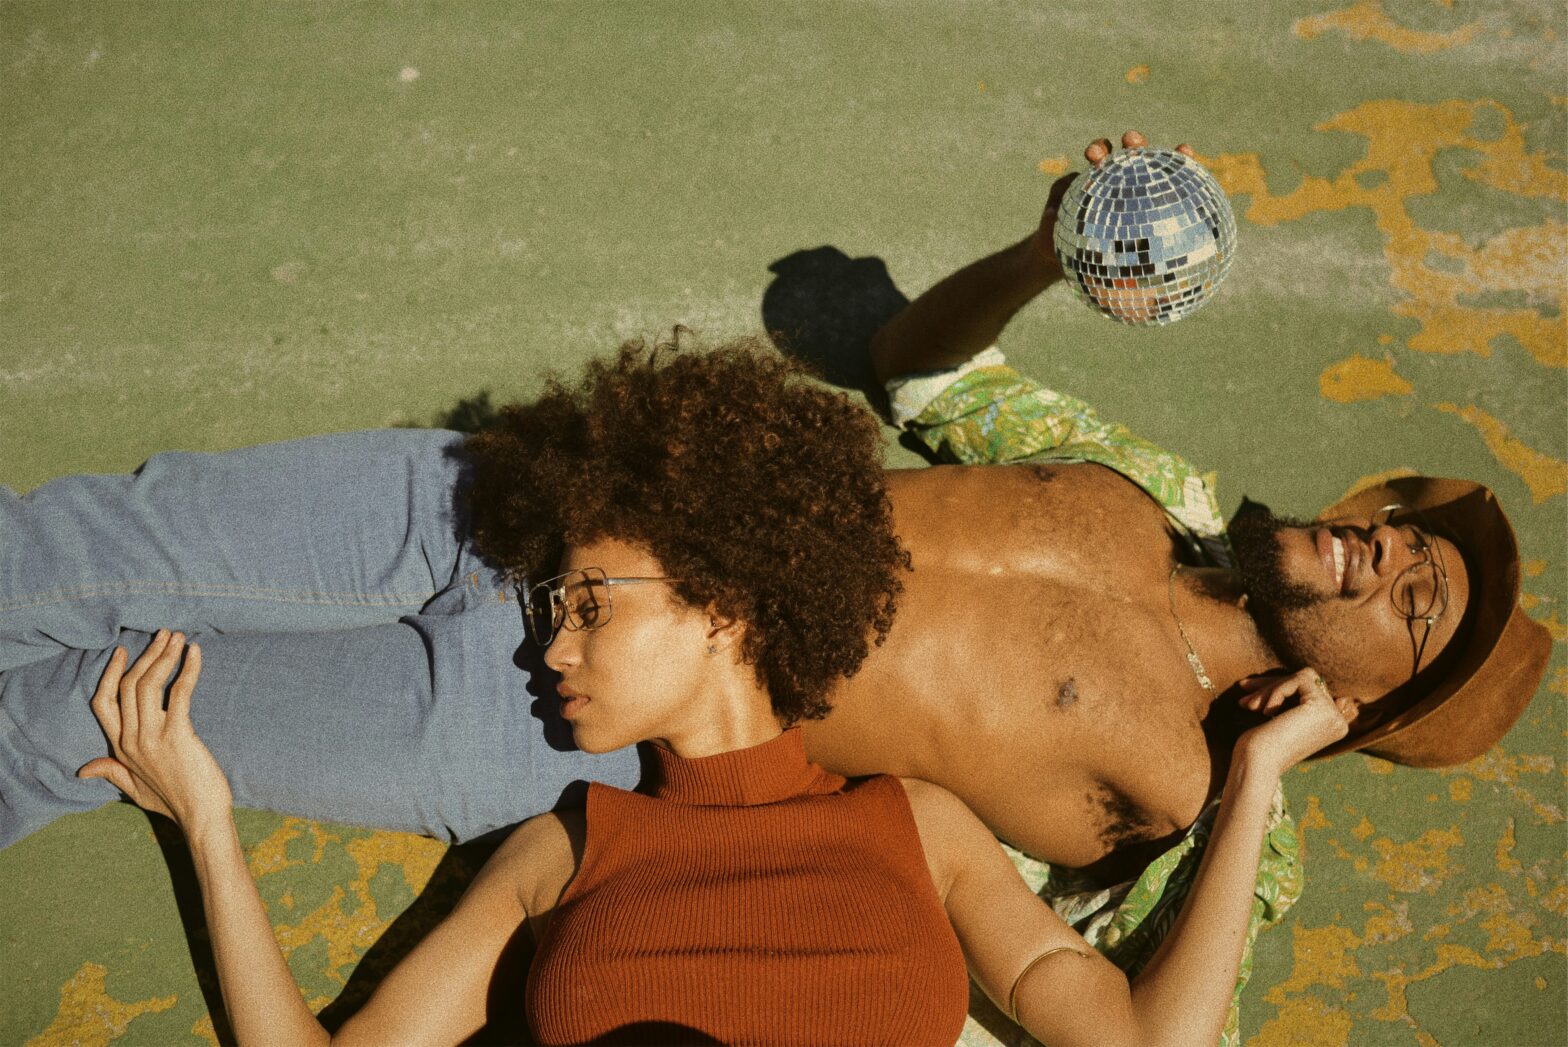 aquarius and aries compatilibity. pictured: black couple laying on ground